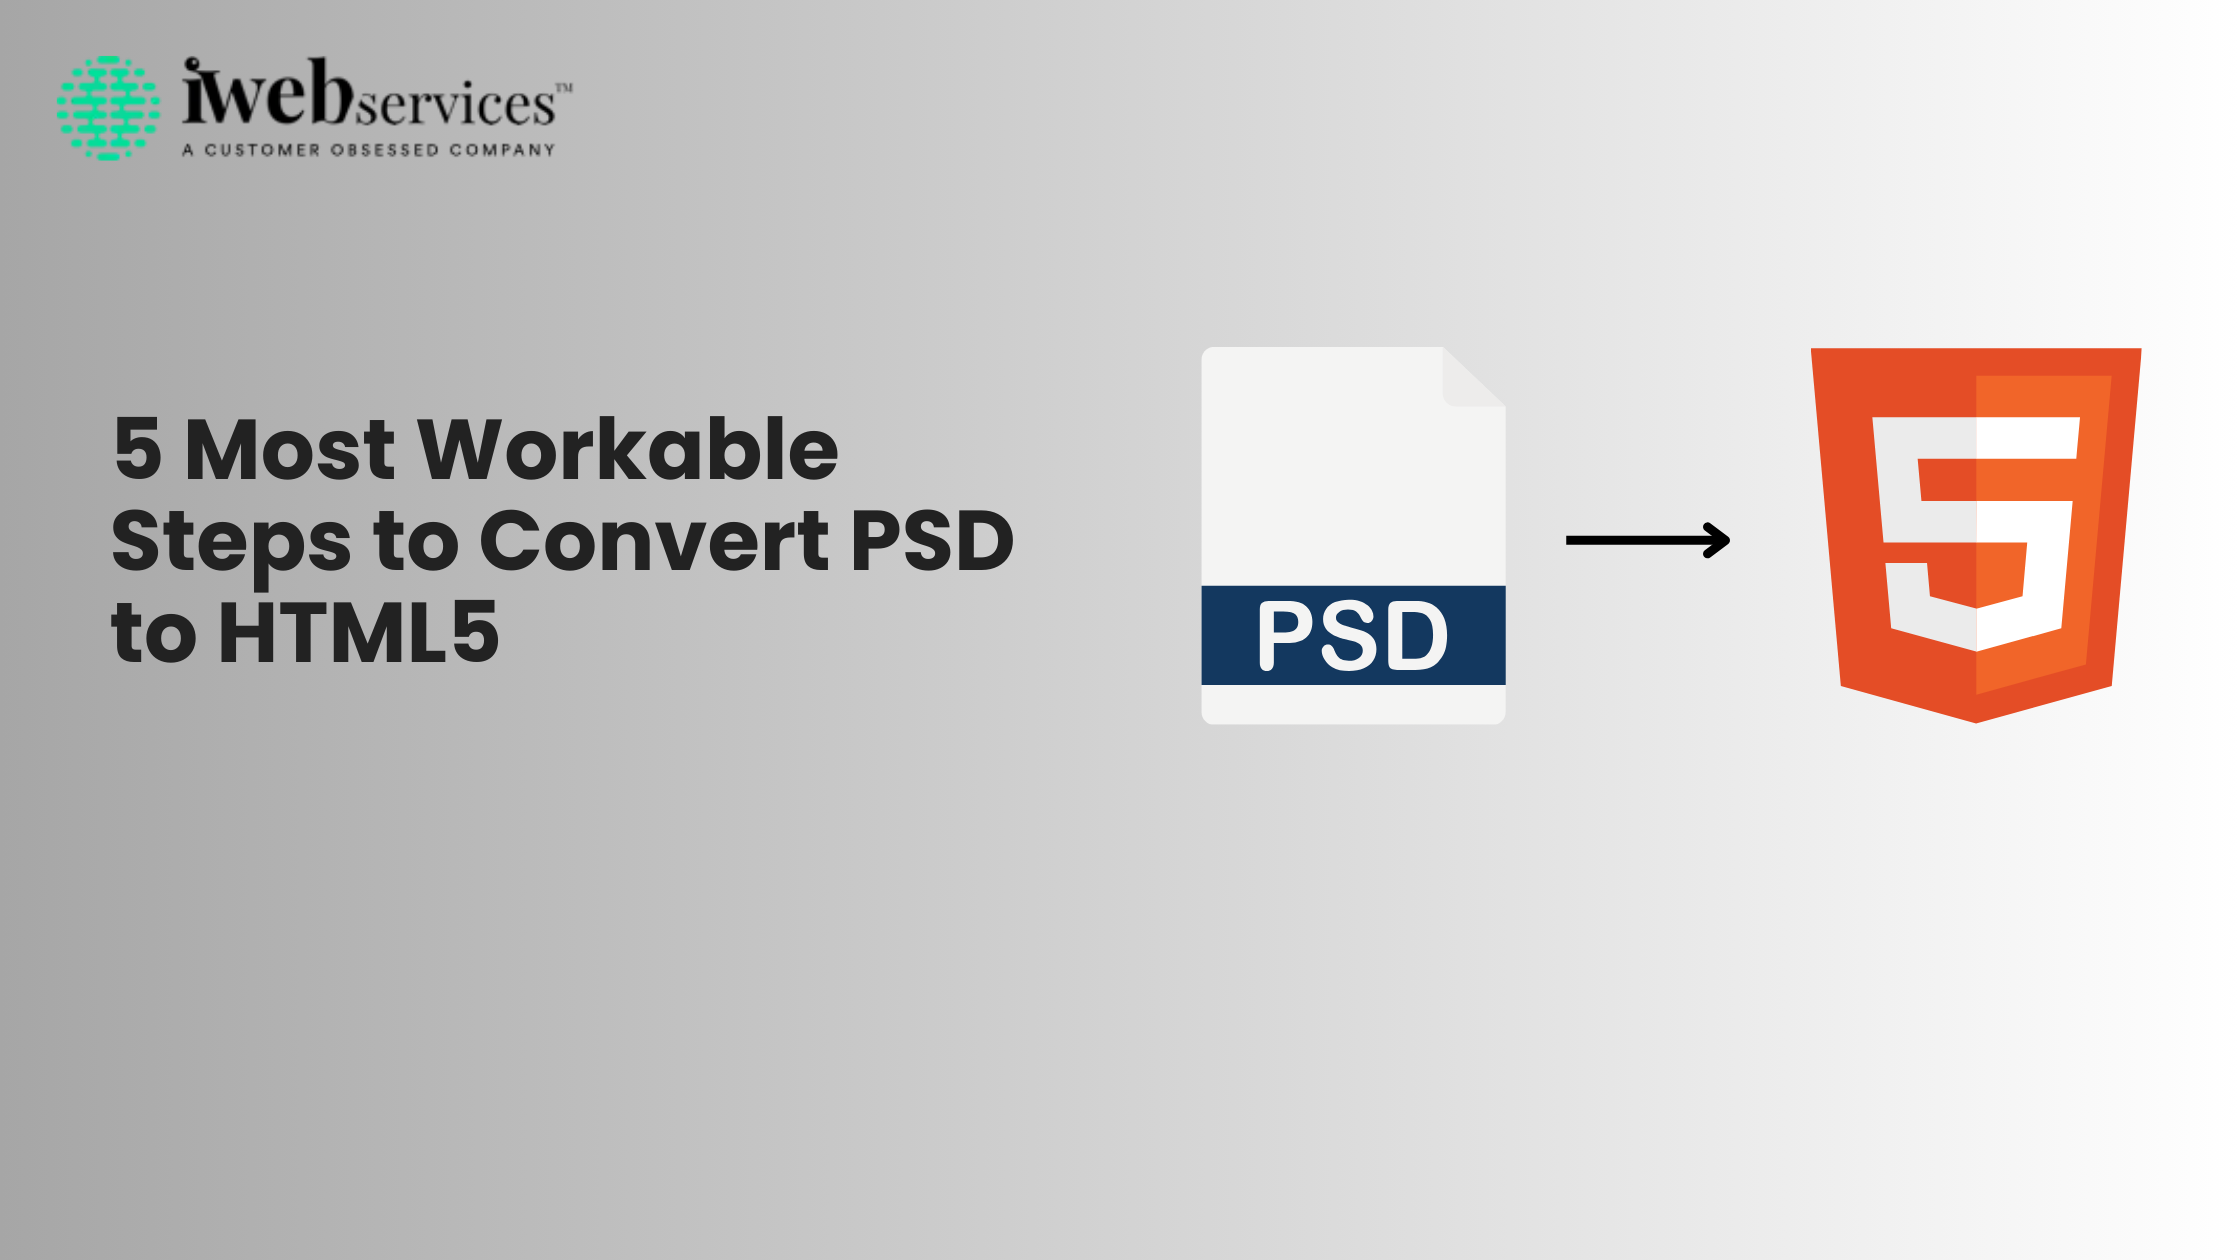 5 Most Workable Steps to Convert PSD to HTML5